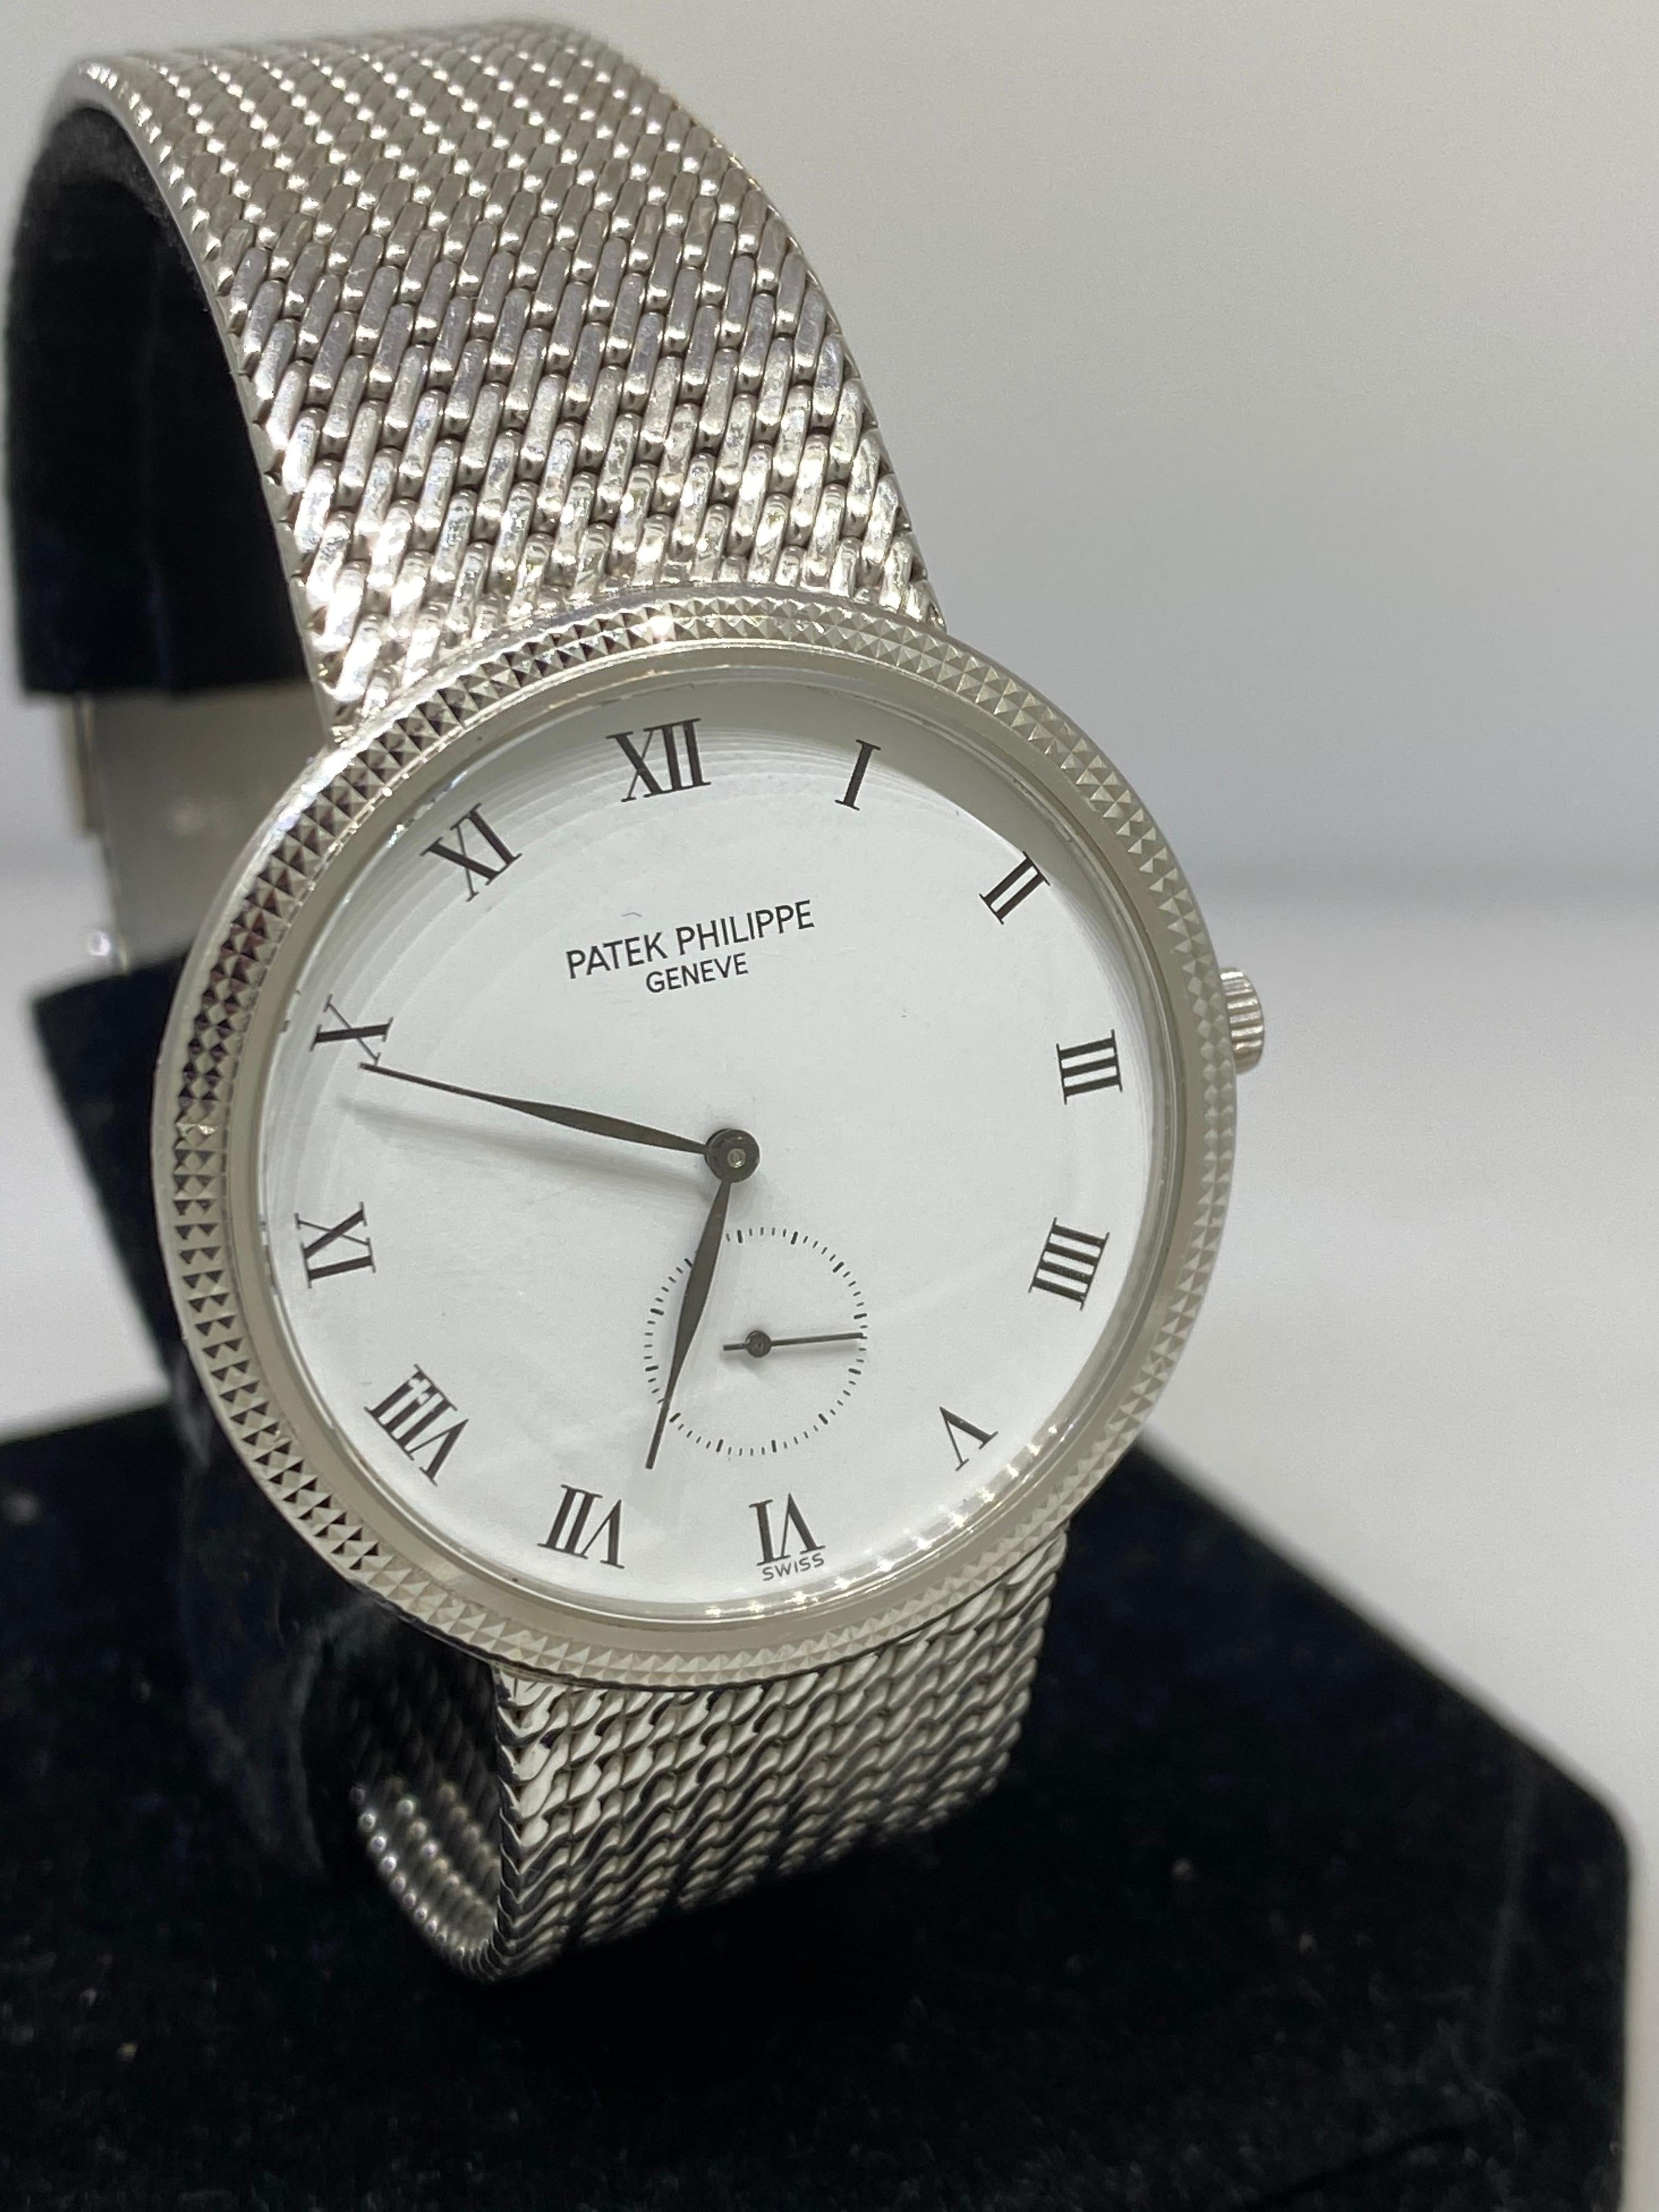 Patek Philippe Calatrava Men's Watch

Model Number: 3919-5g

100% Authentic

Pre-Owned in Excellent Condition

Comes with a generic watch box

18 Karat White Gold Case & Bracelet

Scratch Resistant Sapphire Crystal

White Dial

Roman Numeral Hour